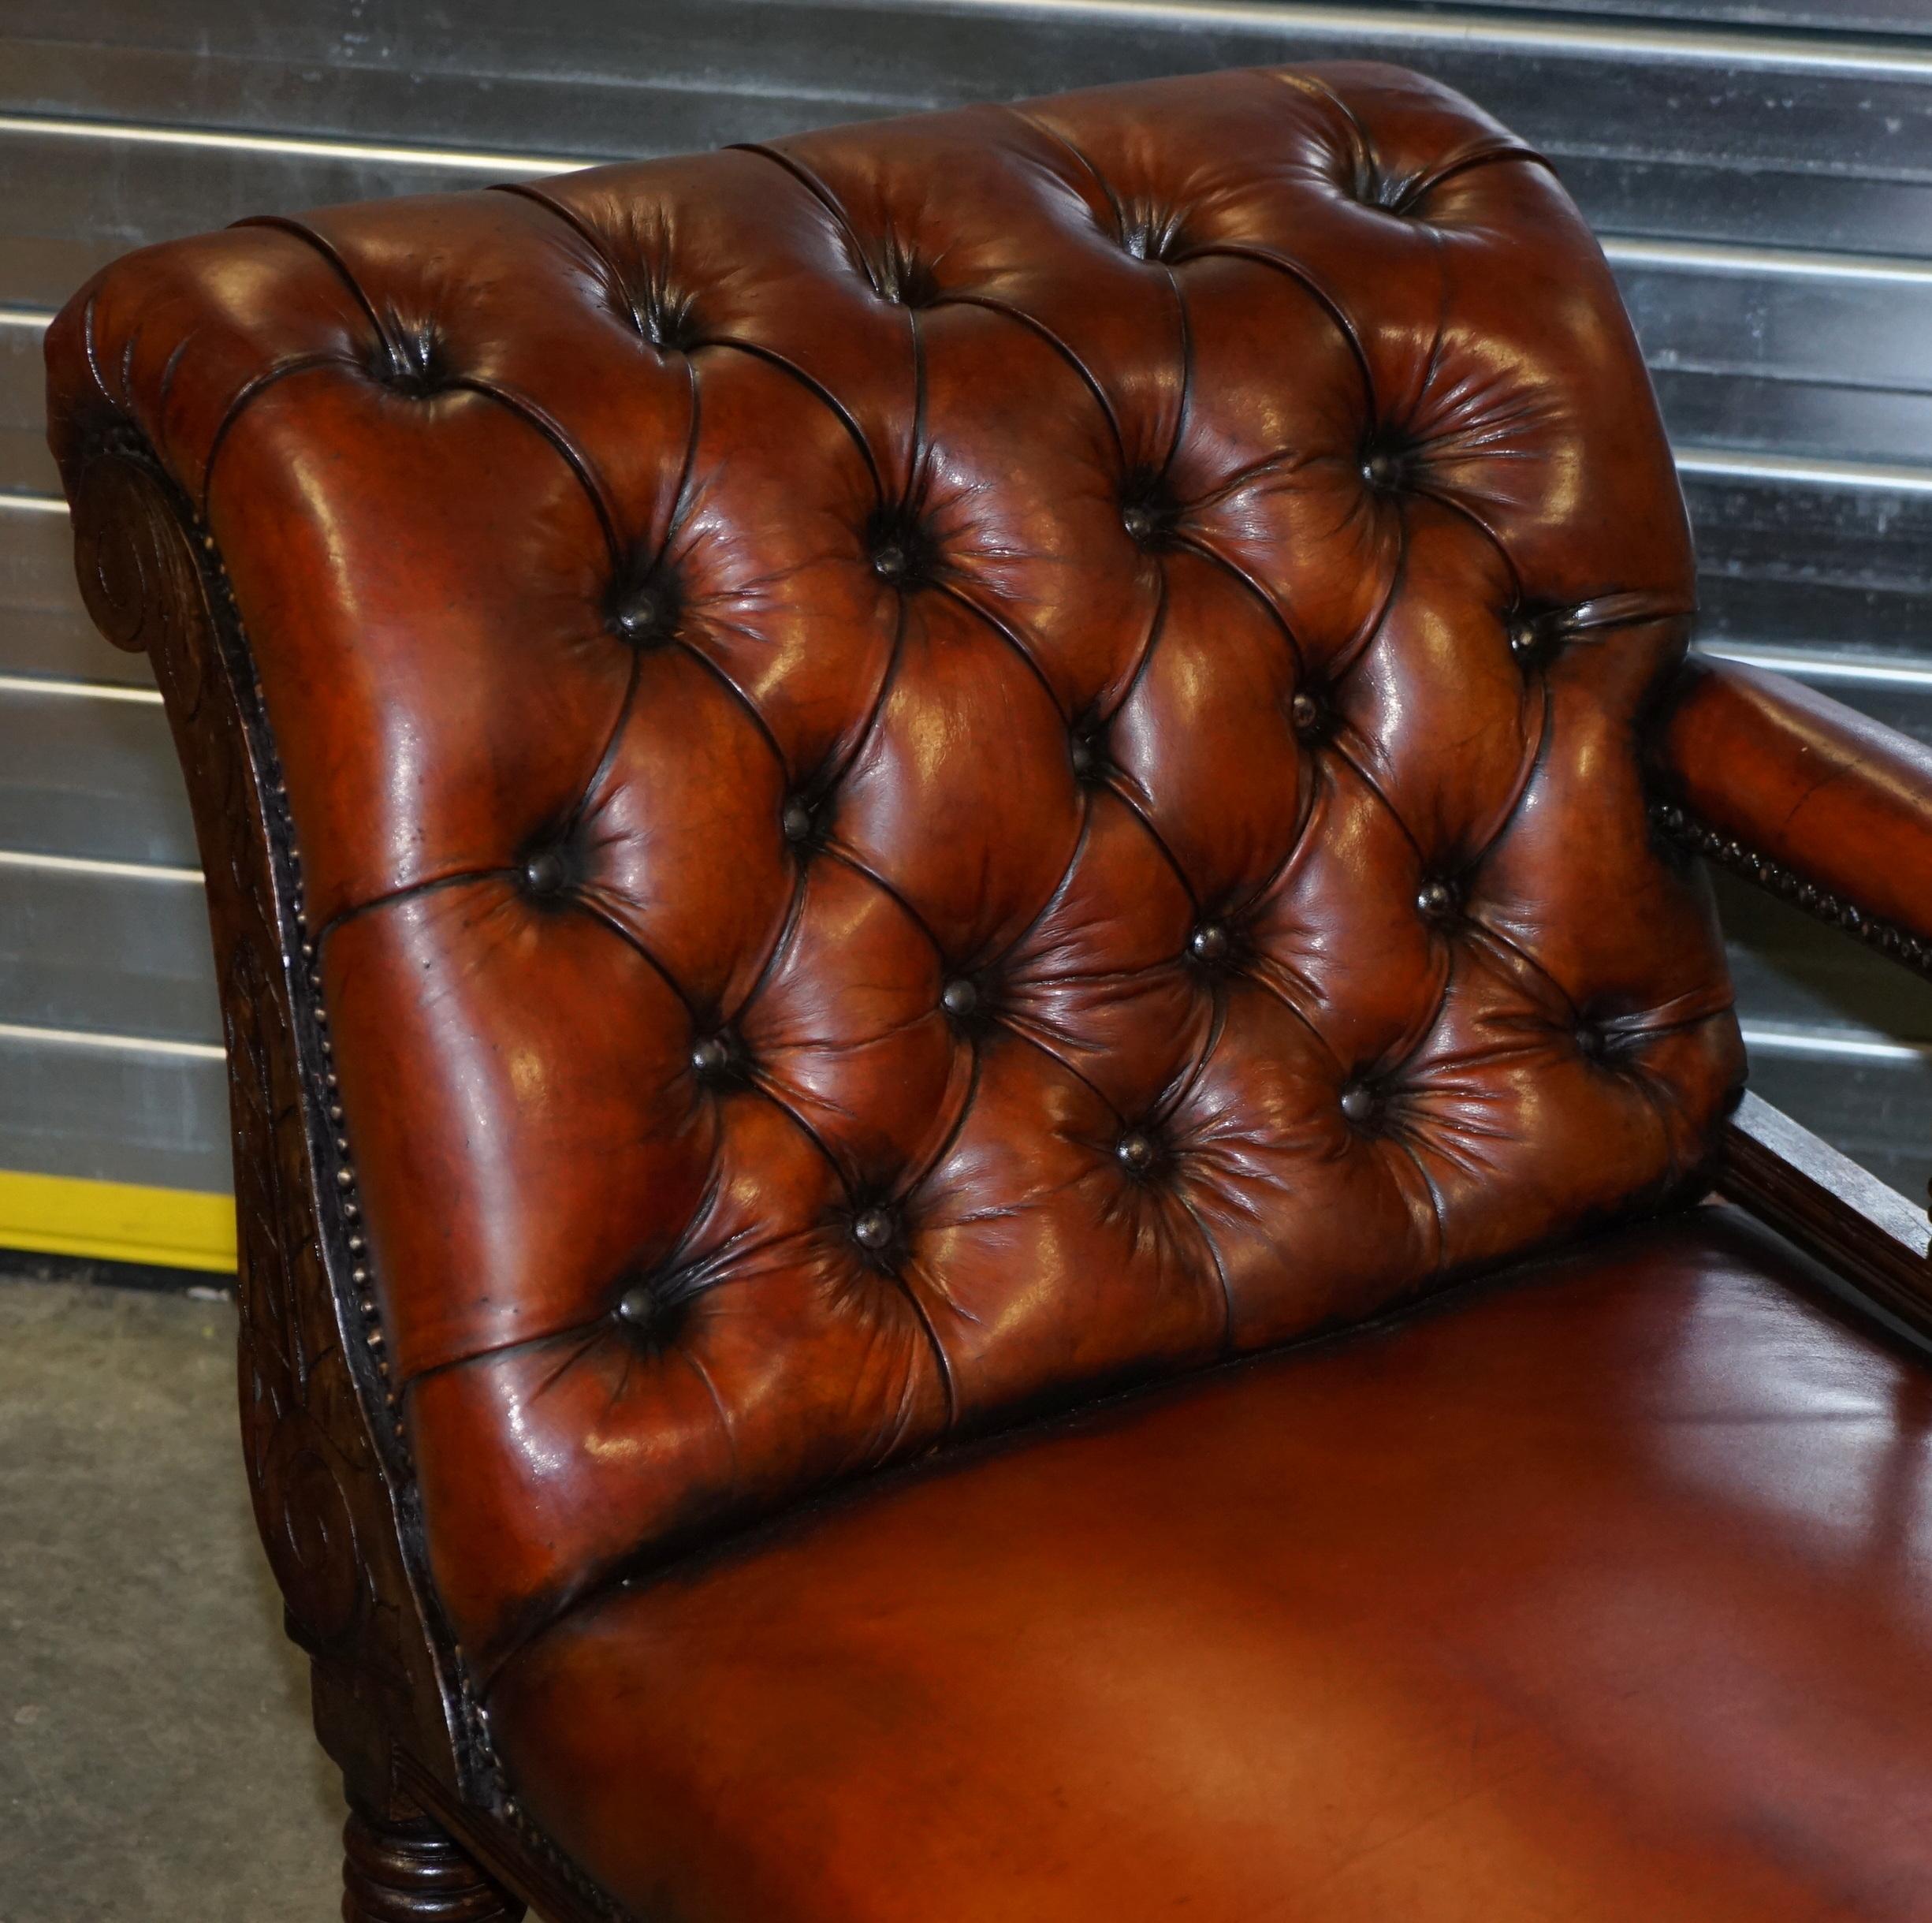 We are delighted to offer for sale this lovely fully restored Victorian hand dyed cigar brown leather Chesterfield chaise lounge daybed

A very good looking well made and exceptionally comfortable piece. This chaise has been fully restored to